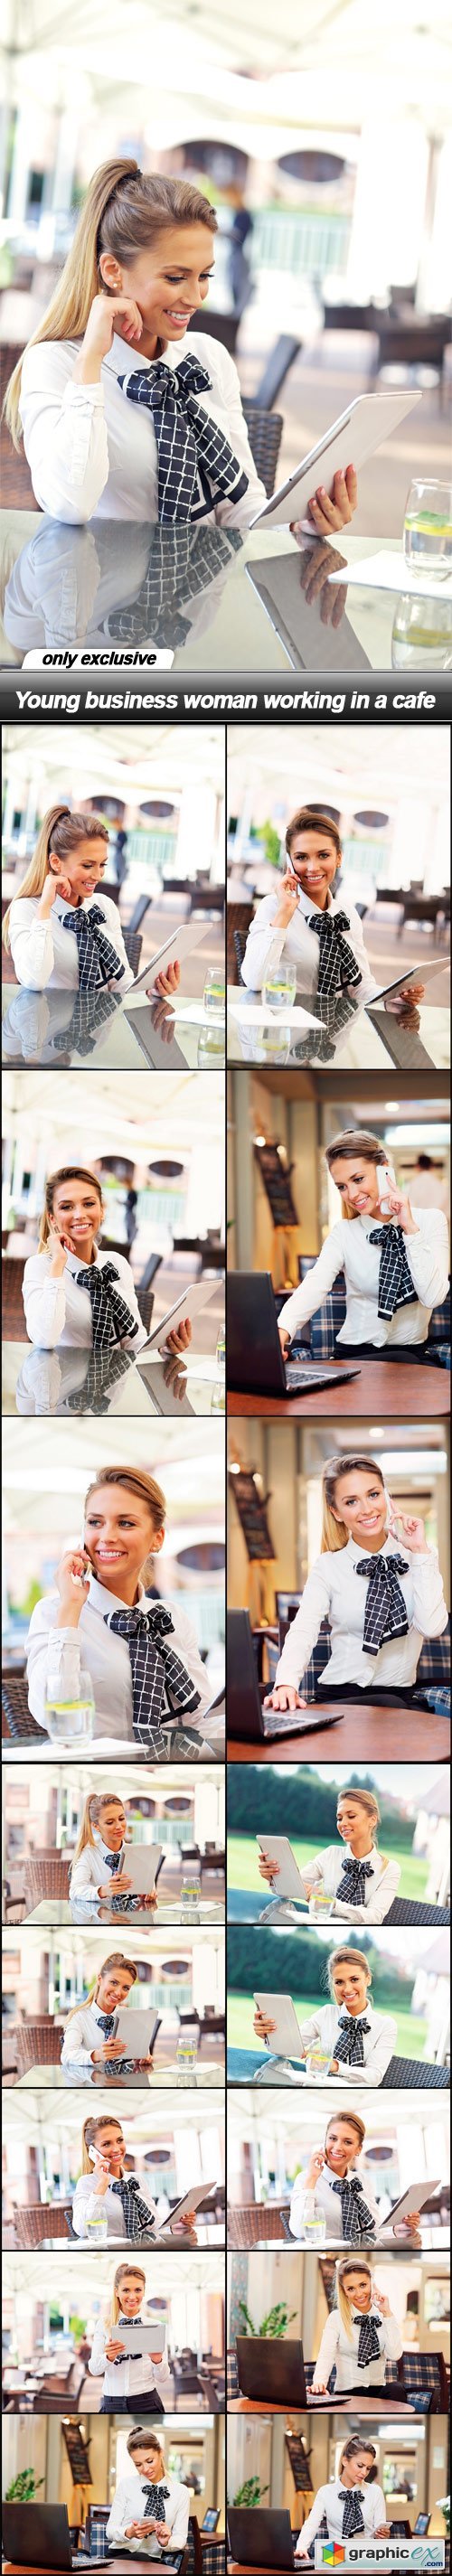 Young business woman working in a cafe - 16 UHQ JPEG